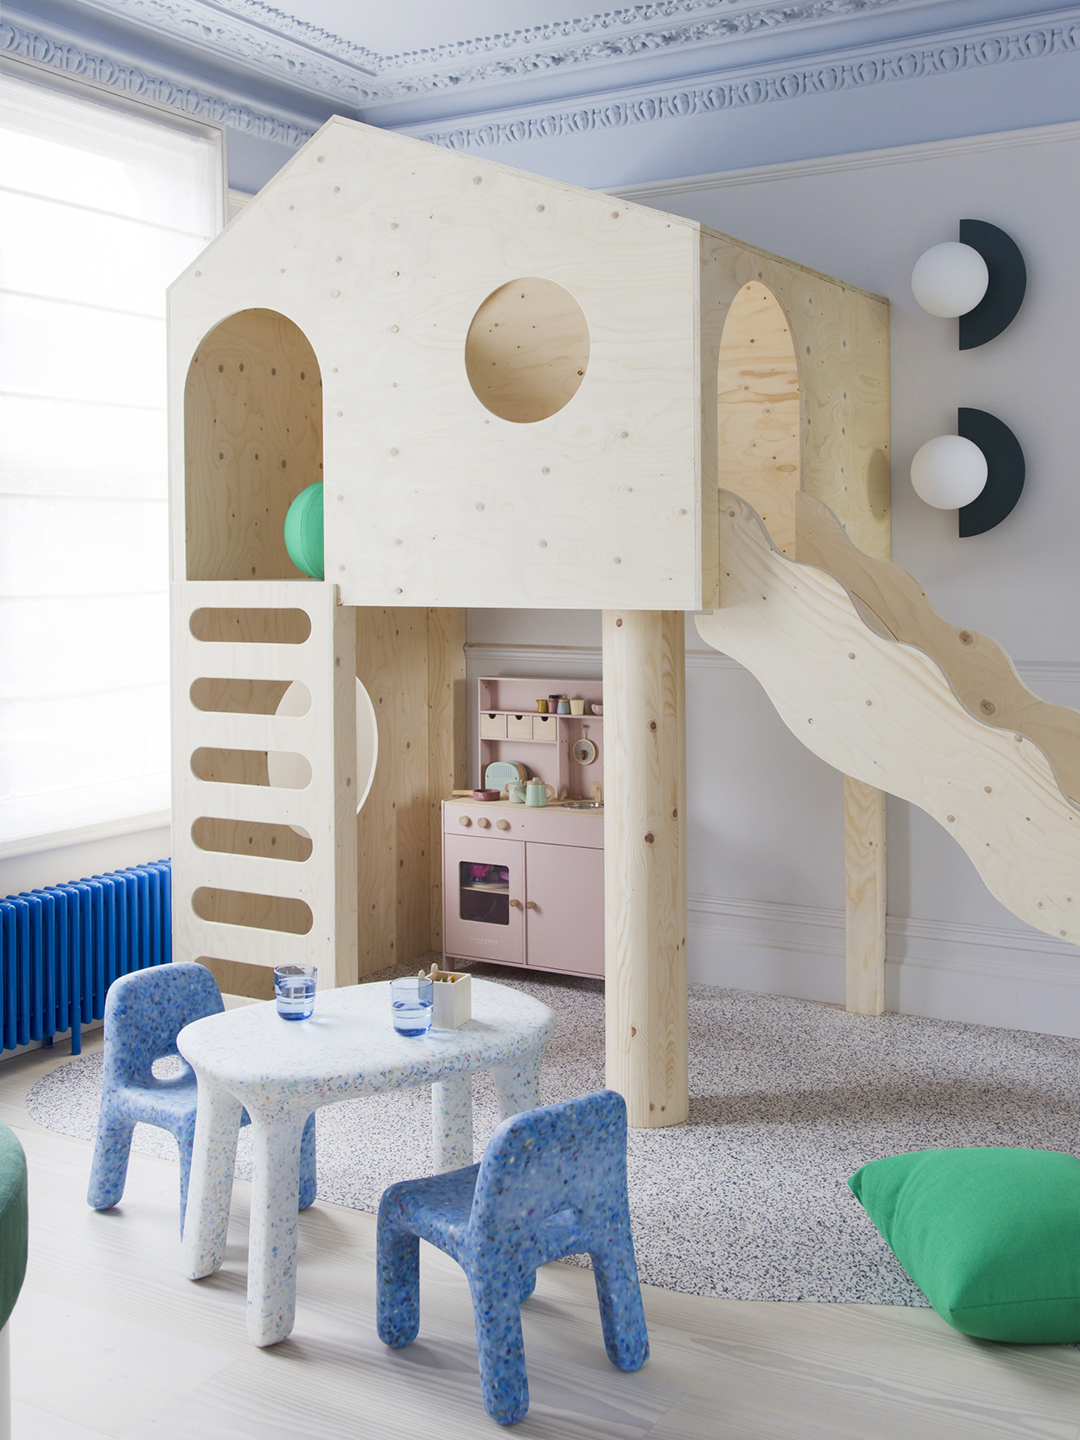 Birch wood play structure with slide in kids' playroom.